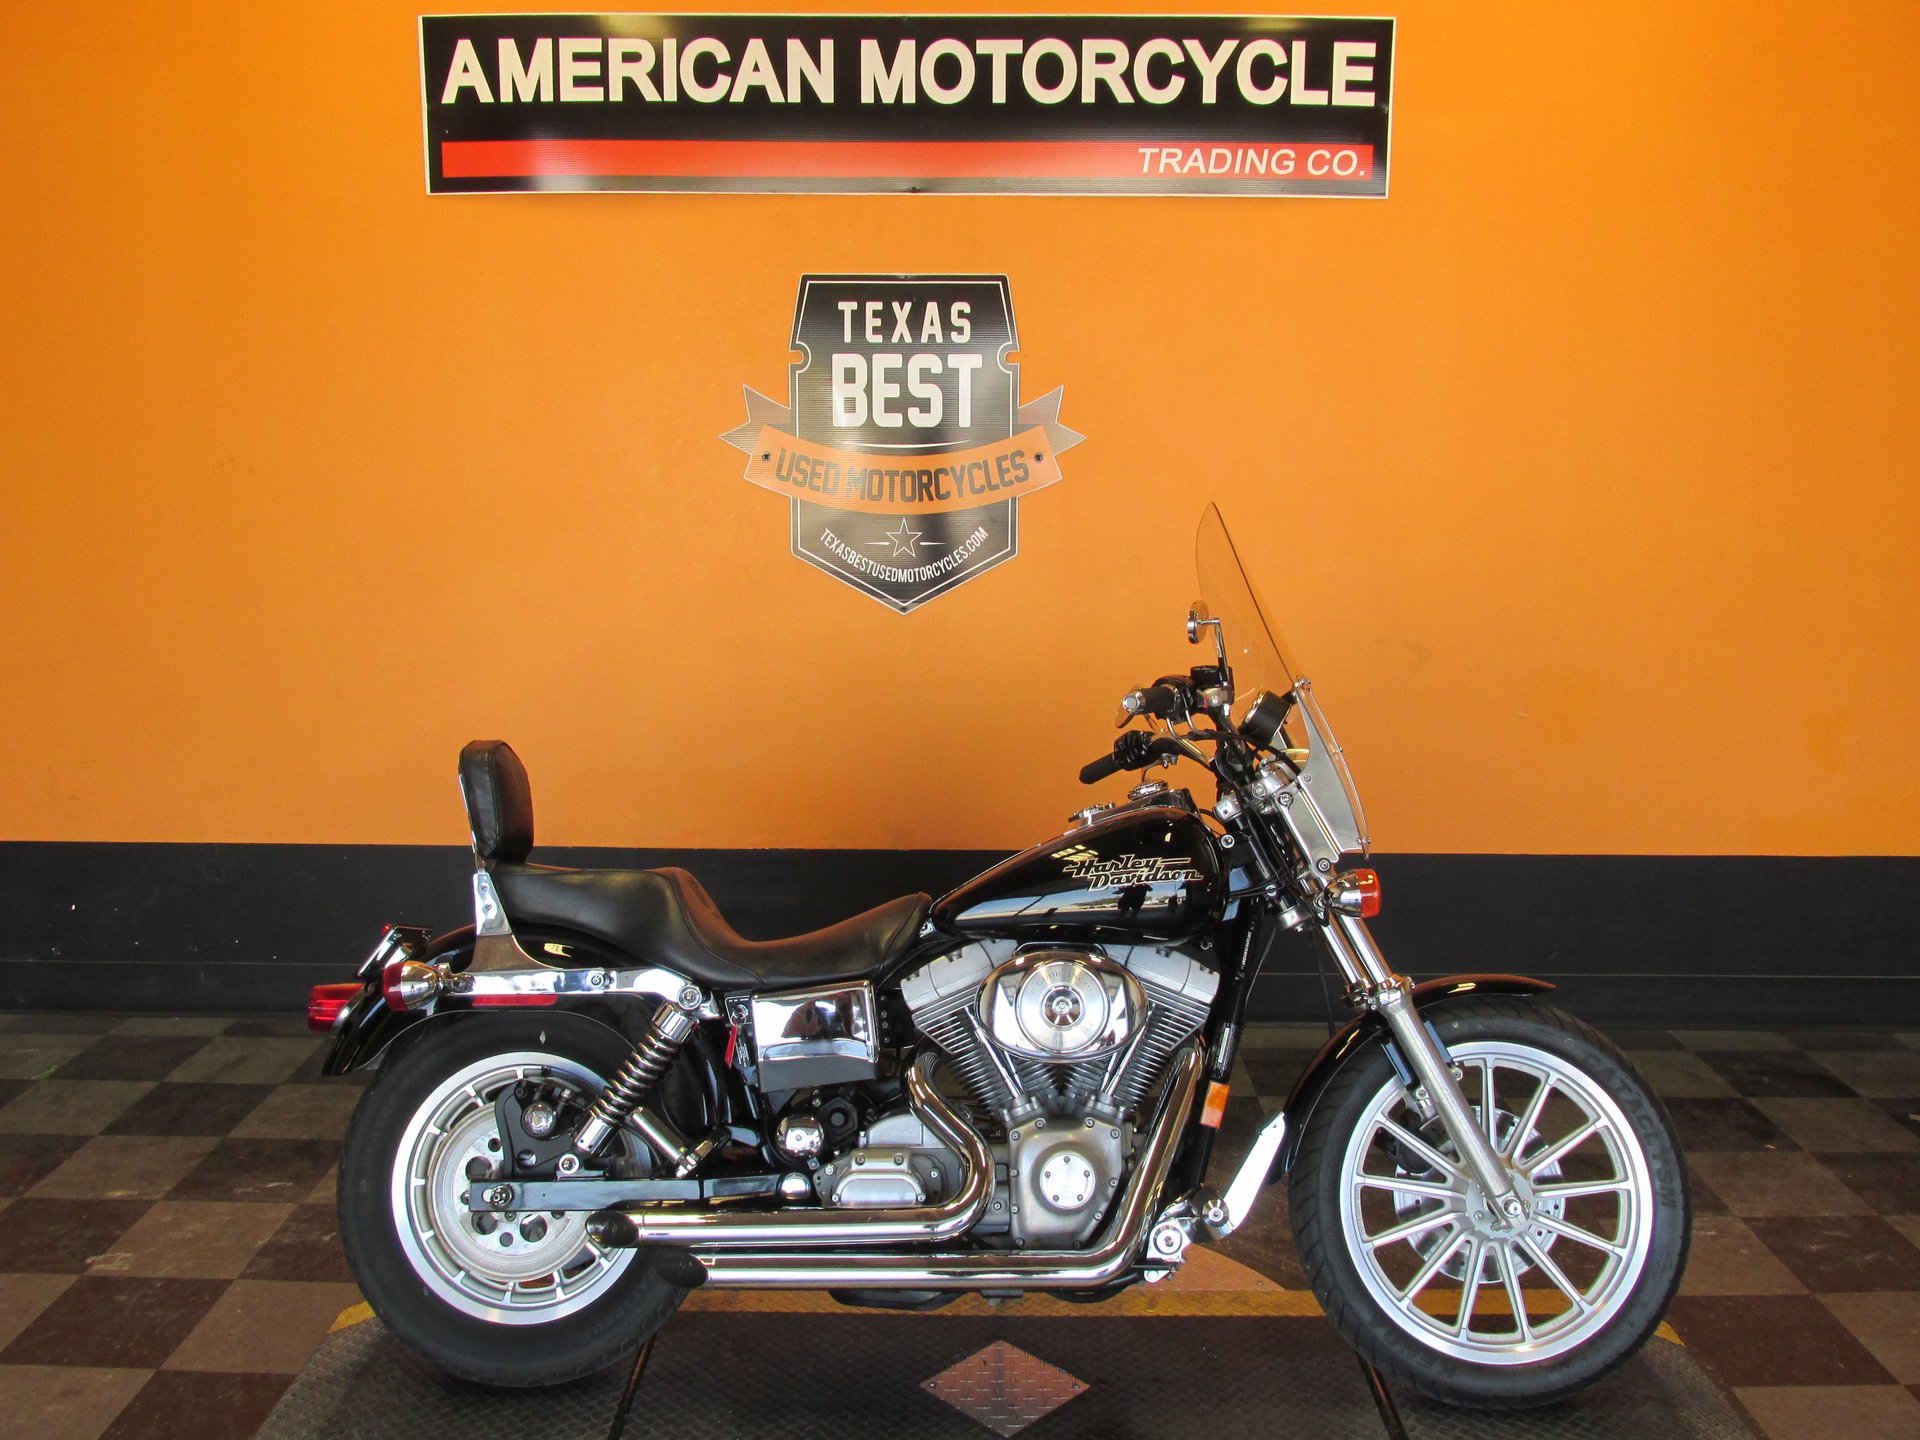 1999 Harley Davidson Dyna Super Glide American Motorcycle Trading Company Used Harley Davidson Motorcycles